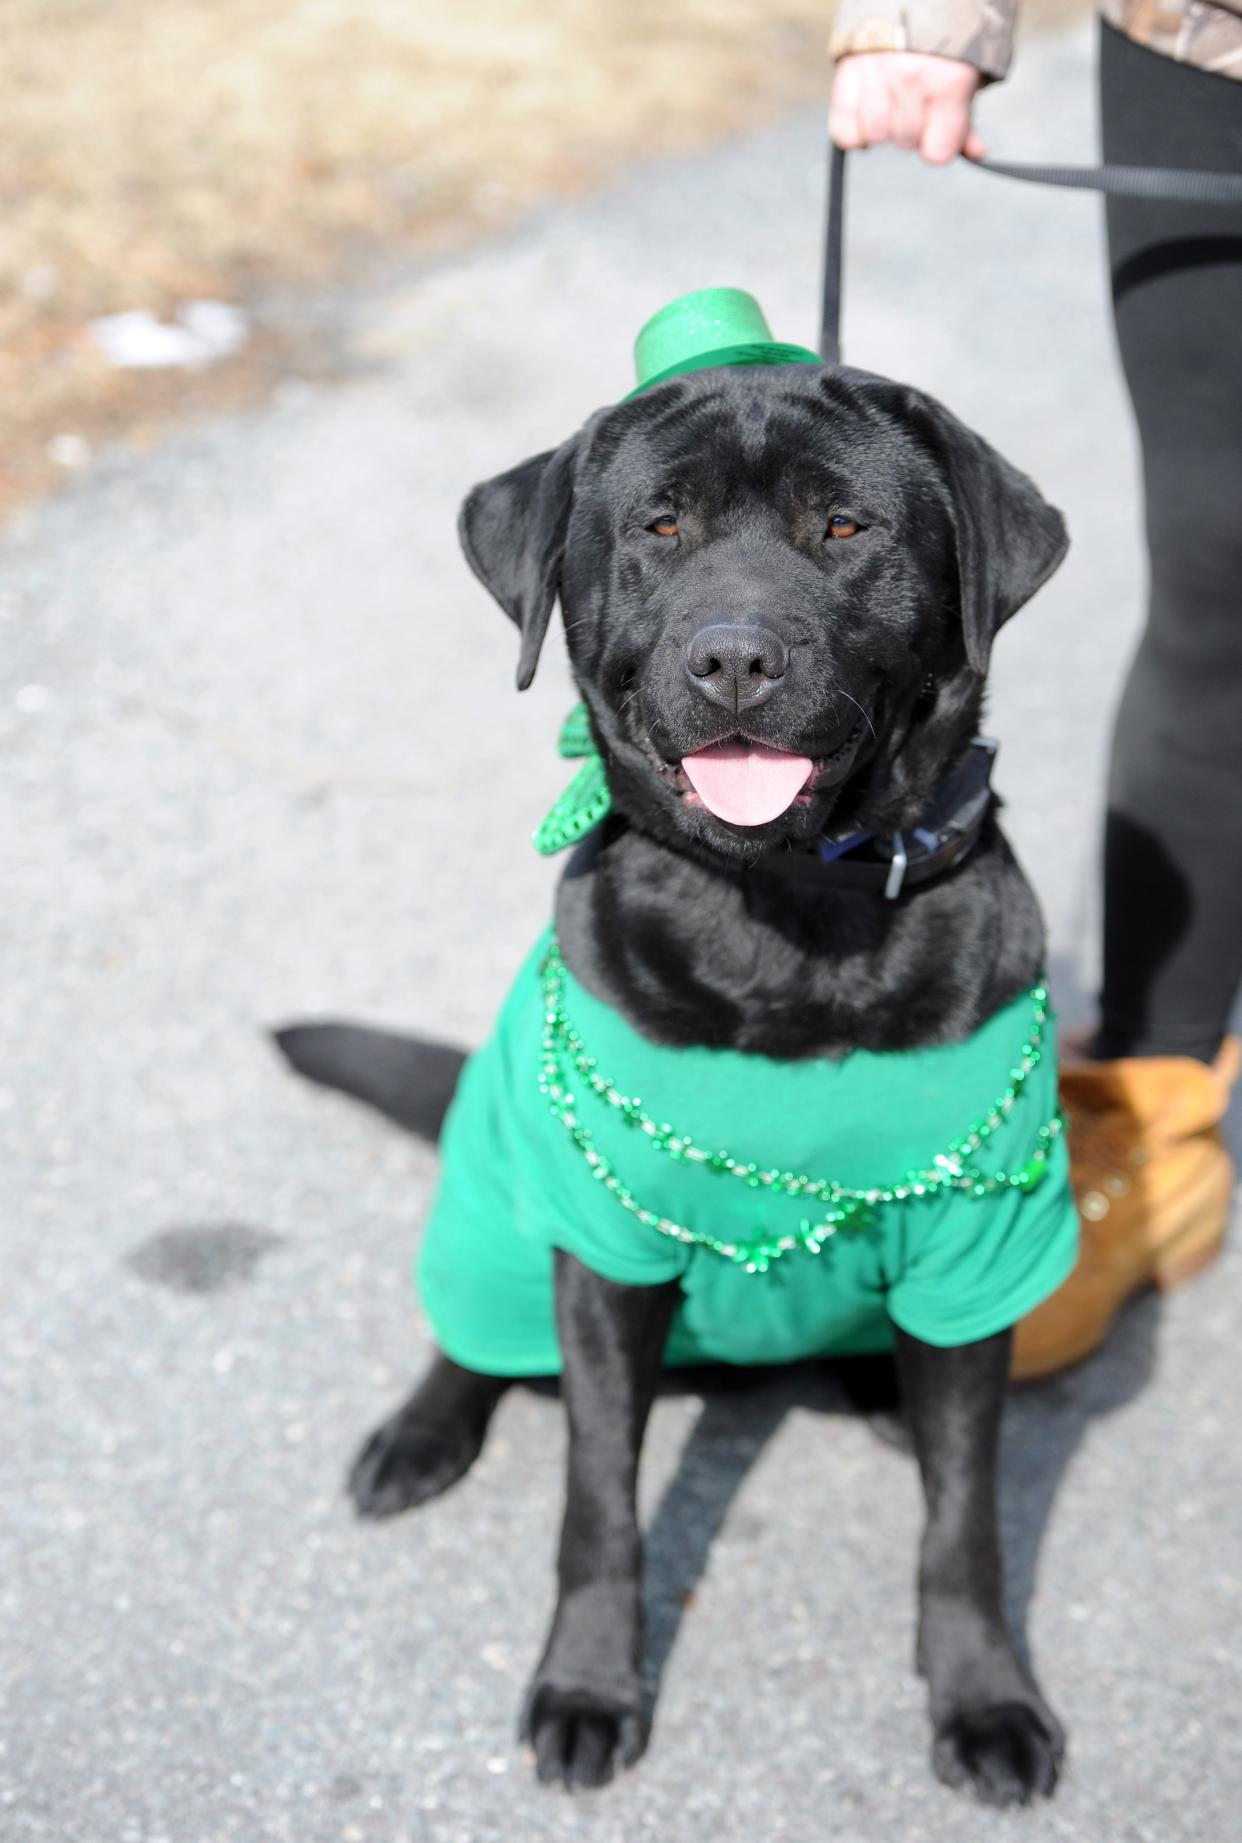 Many spectators and their pets are traditionally decked out in green for the Cape Cod St. Patrick's parade. Olive, of South Yarmouth, had this outfit for the 2020 event.